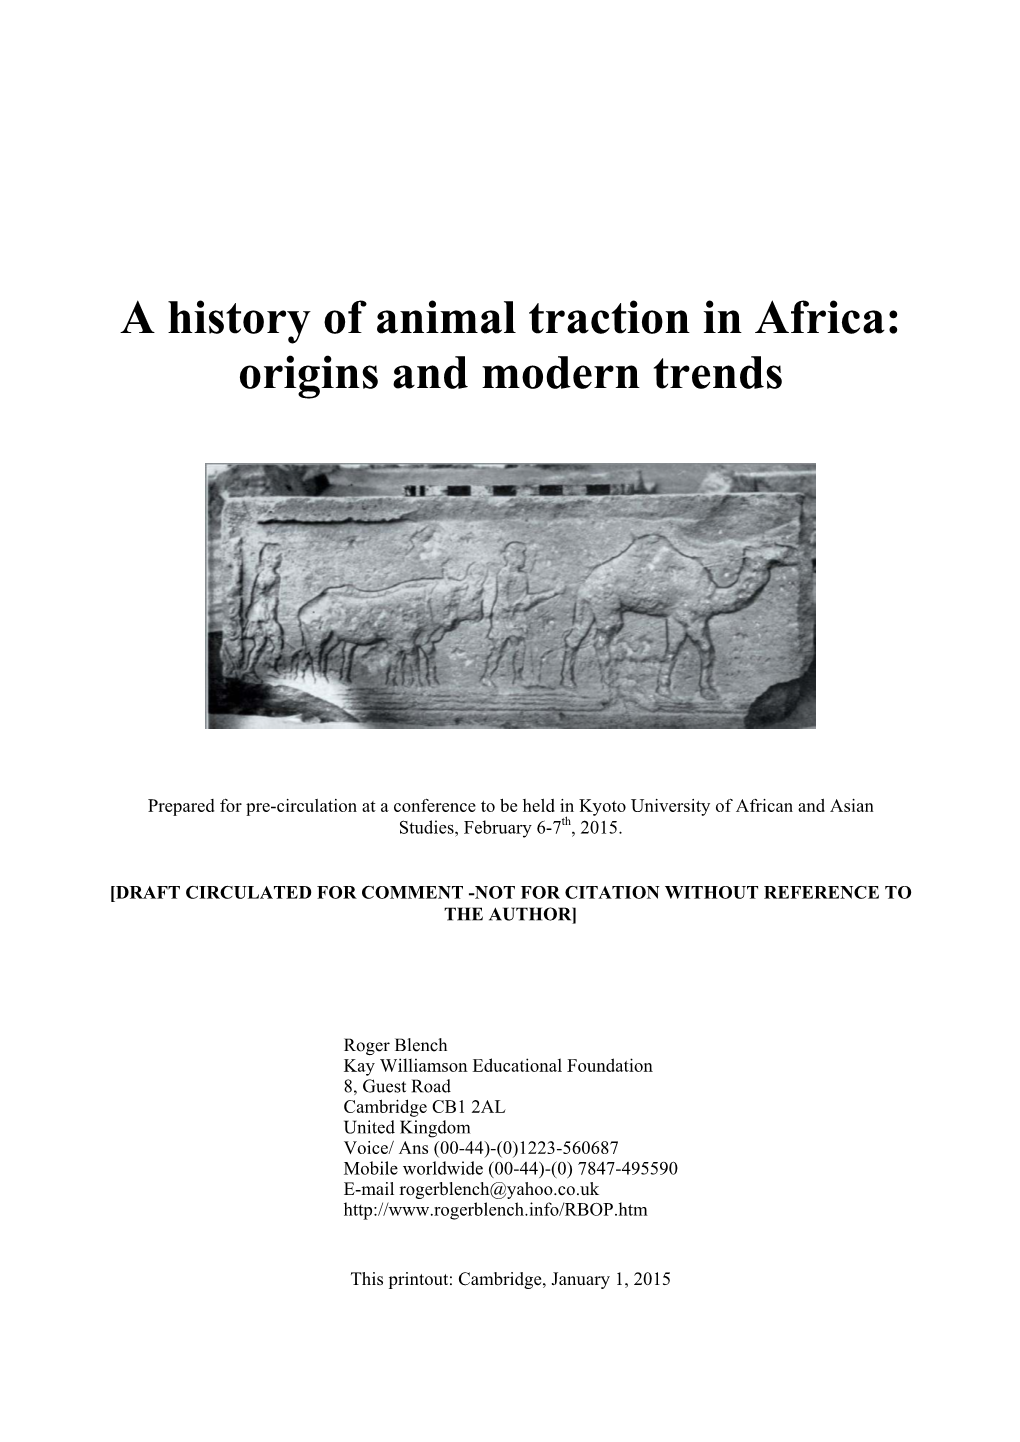 A History of Animal Traction in Africa: Origins and Modern Trends